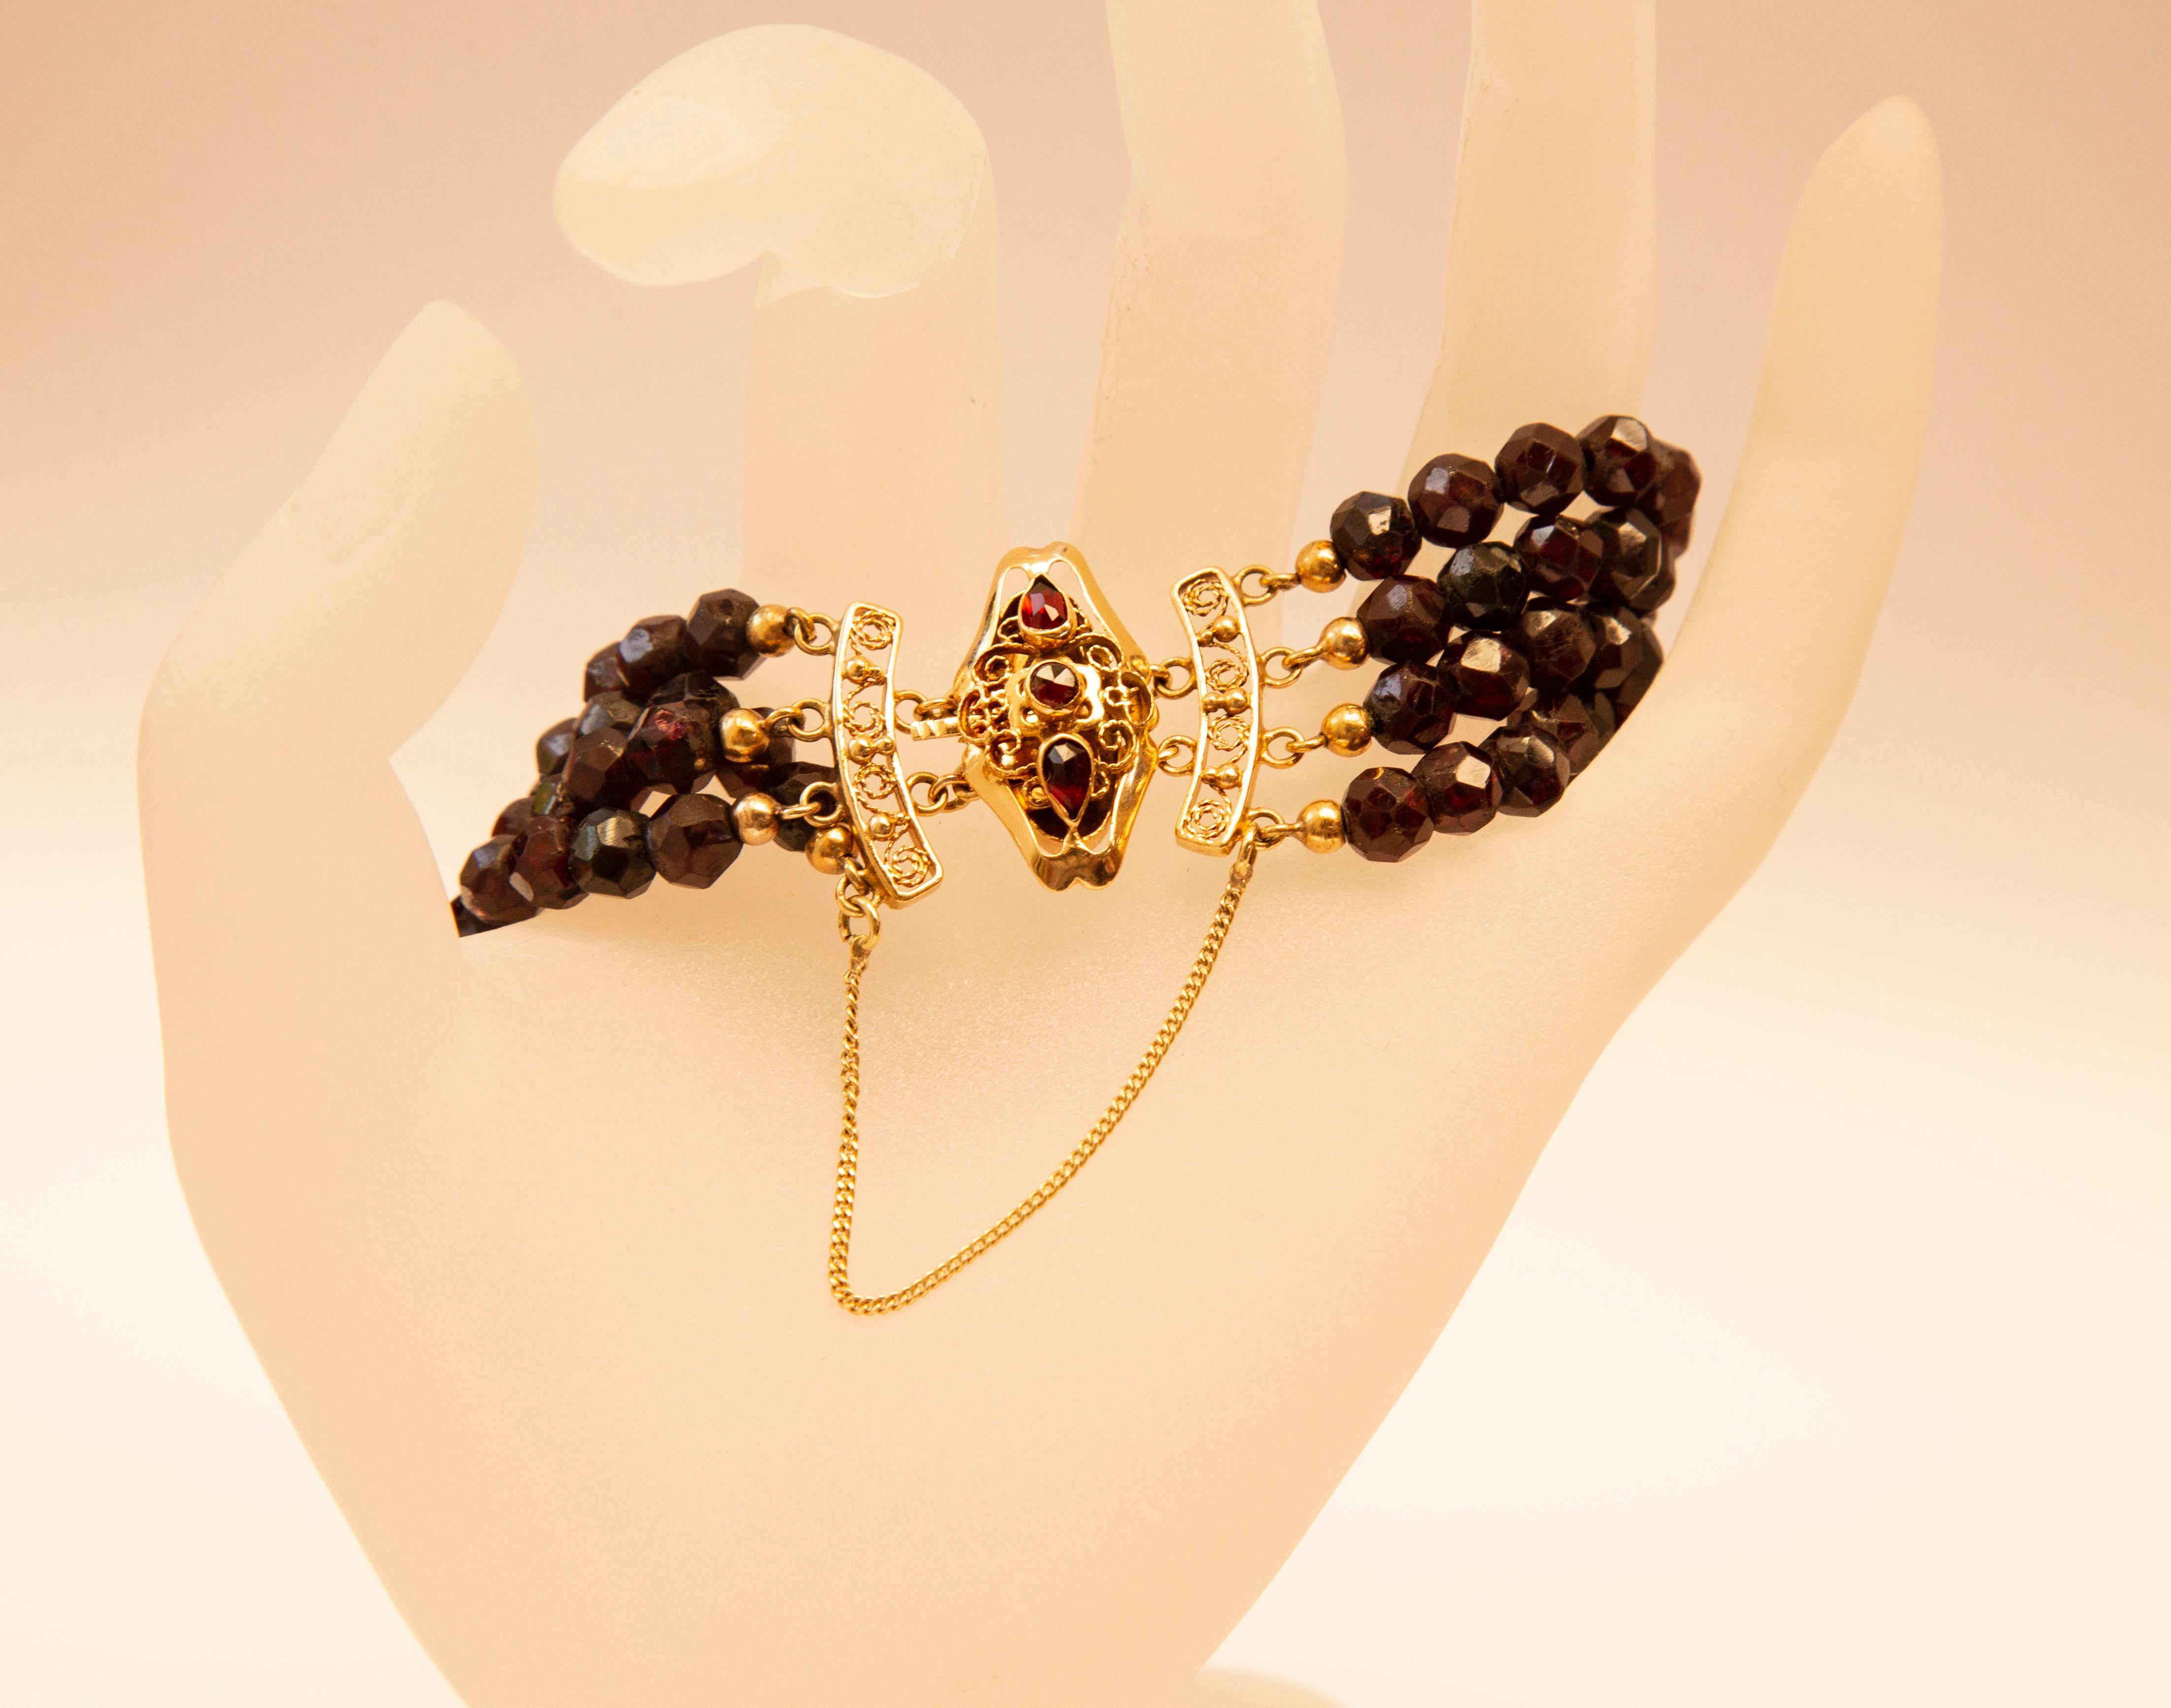 A vintage 4-row genuine faceted garnet beads bracelet with filigree 14 karat solid yellow gold closure. The closure features a 14 karat gold safety chain permanently attached on both sides. The closure is stamped with an oak leaf, that stands for